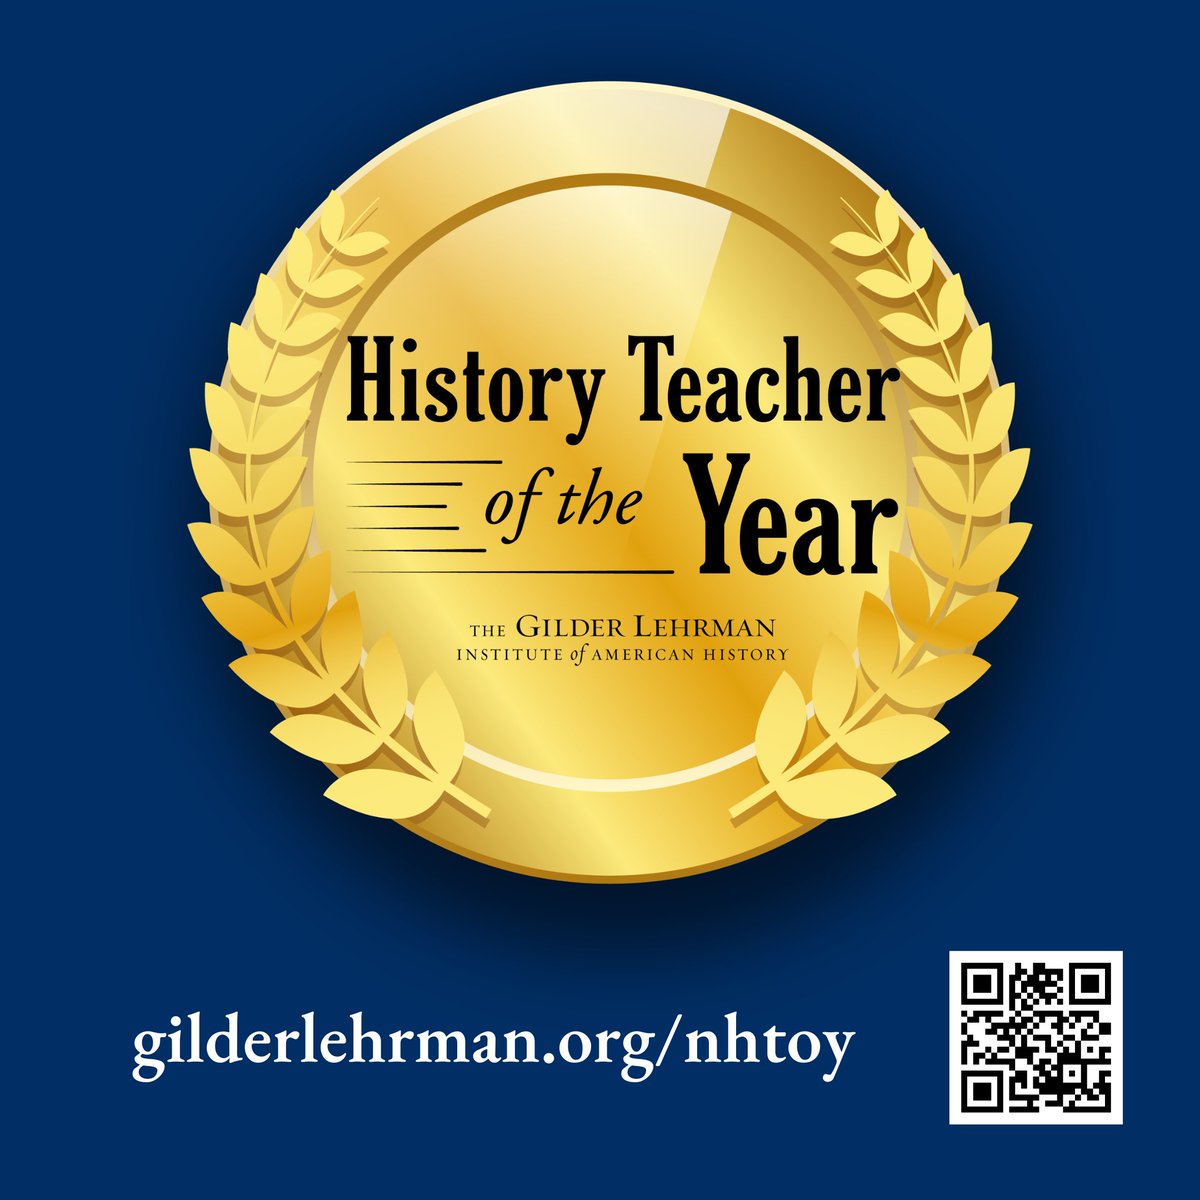 Less than a month left to nominate a deserving teacher!!! #NHTOY